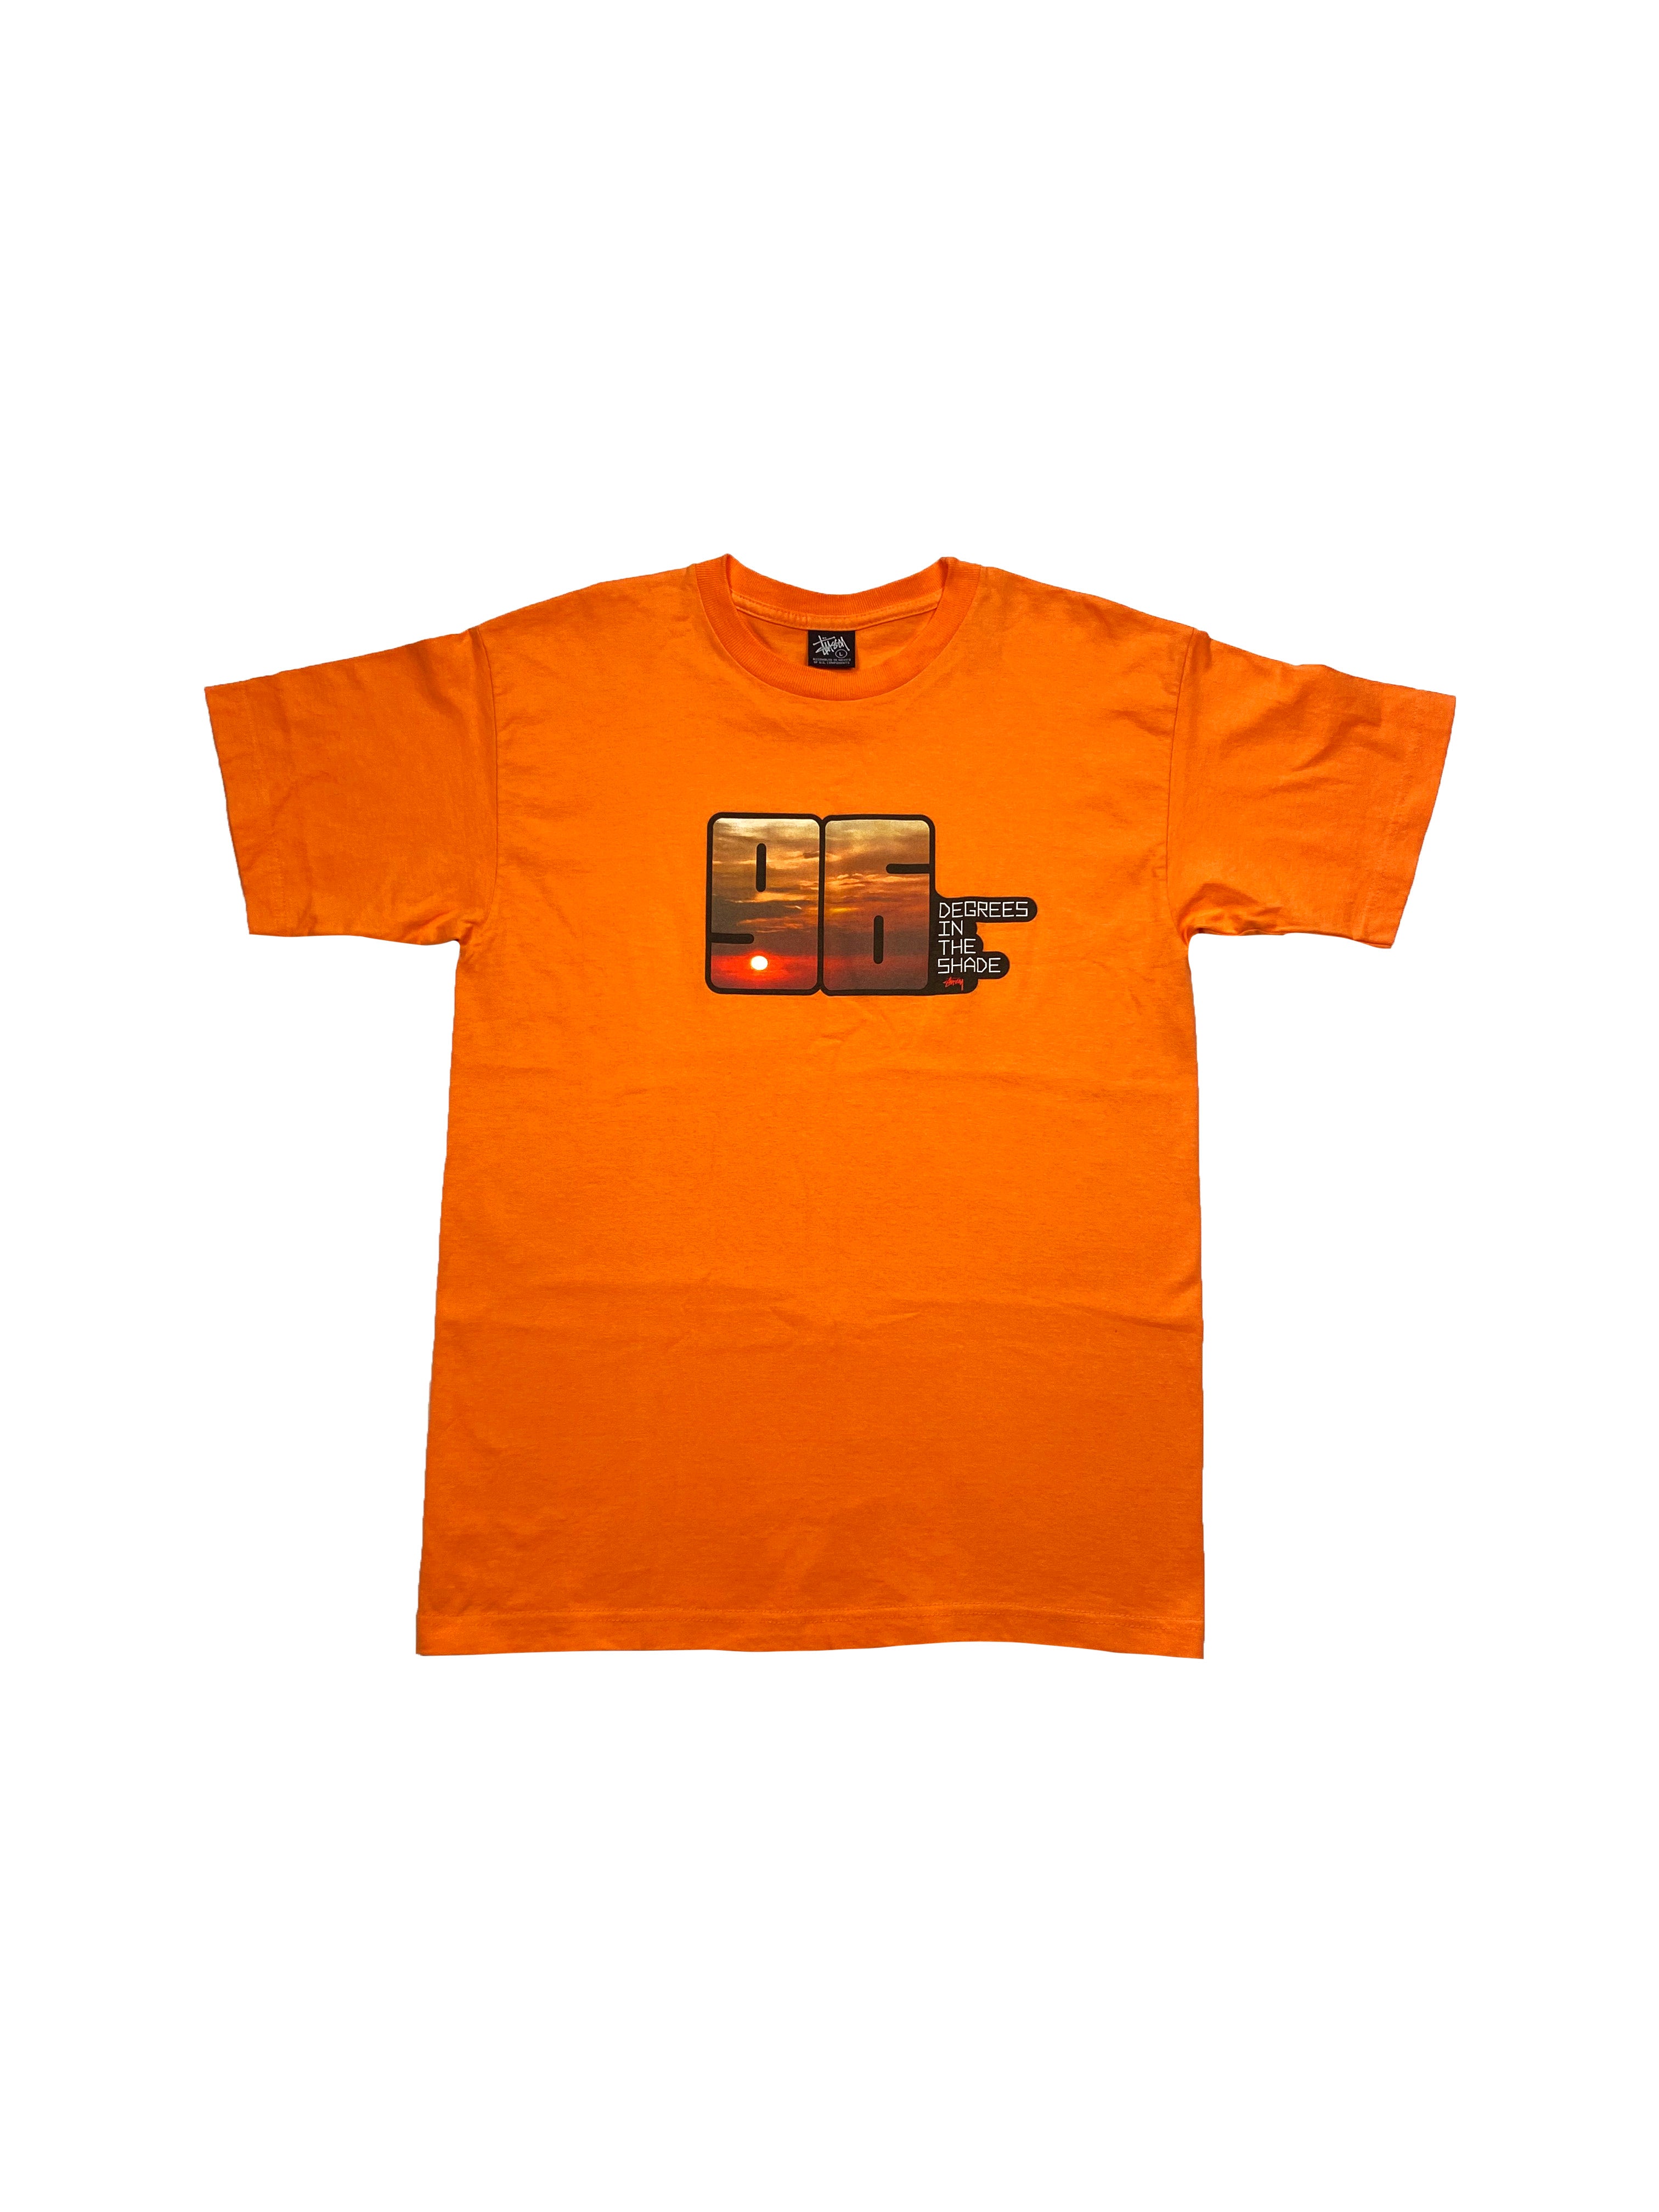 Stussy '96 Degrees in the shade' Orange T-shirt 00's